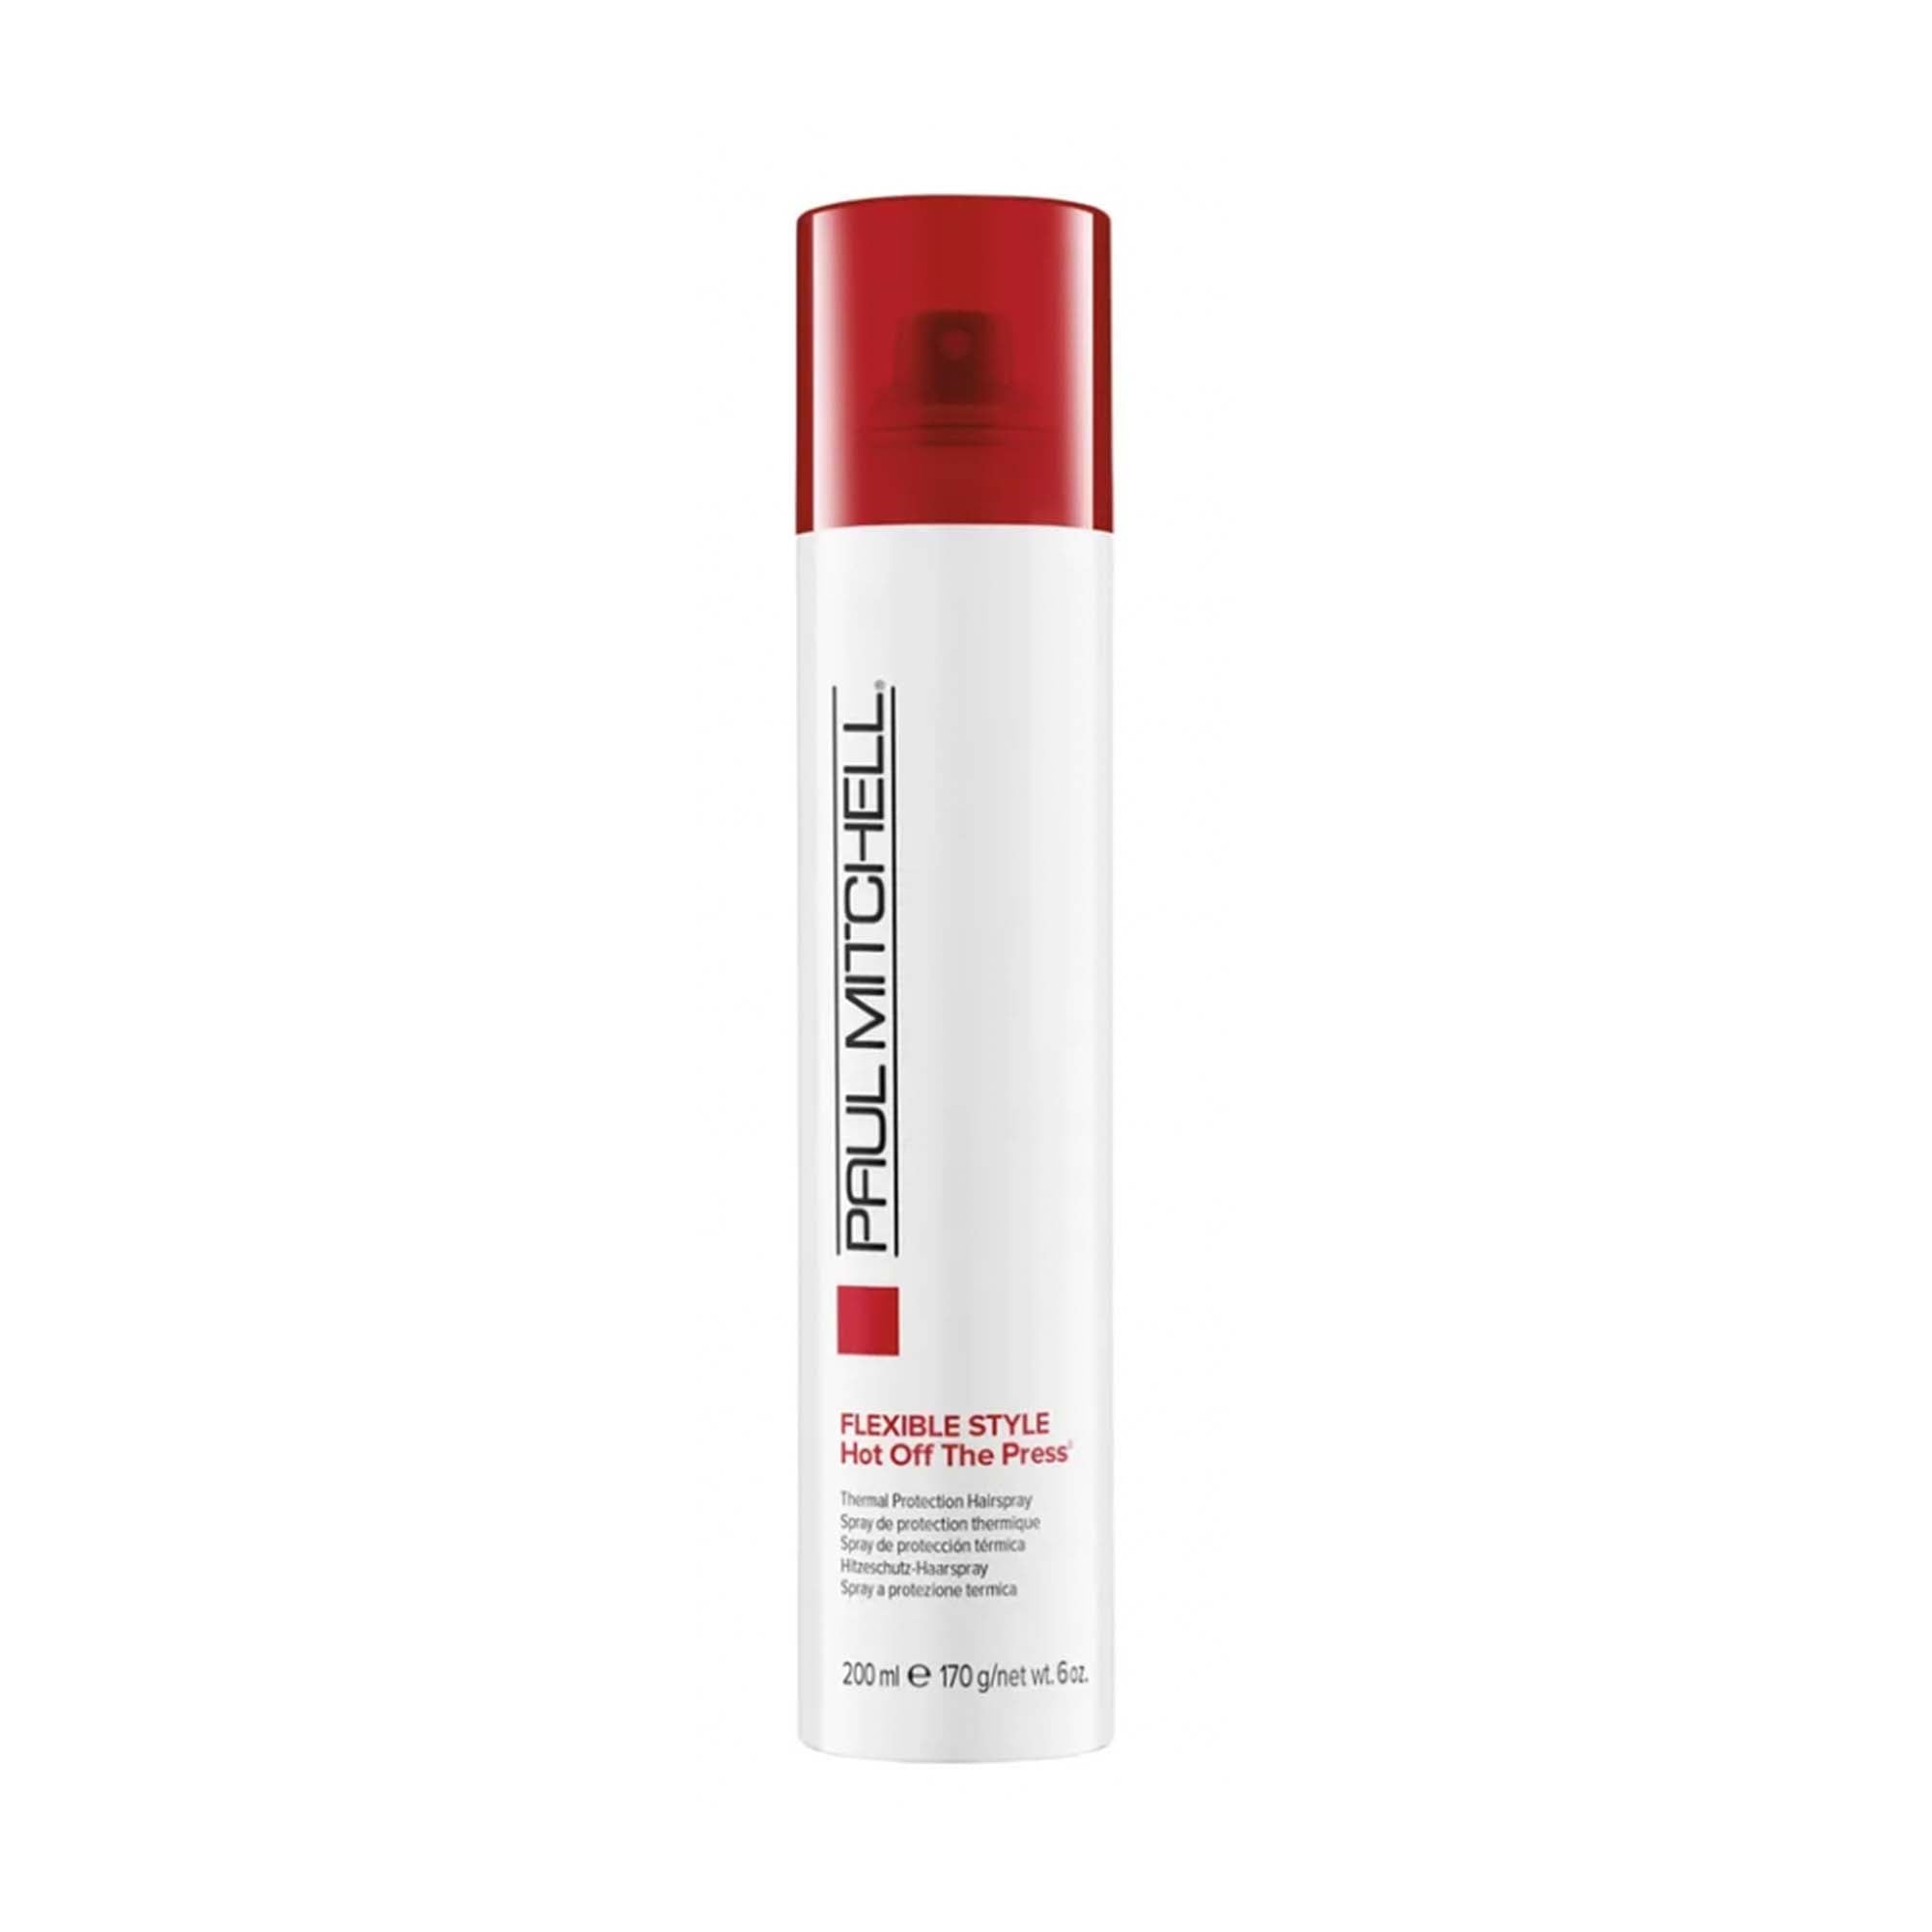 Paul Mitchell Flexible Style Hot Off the Press 6oz